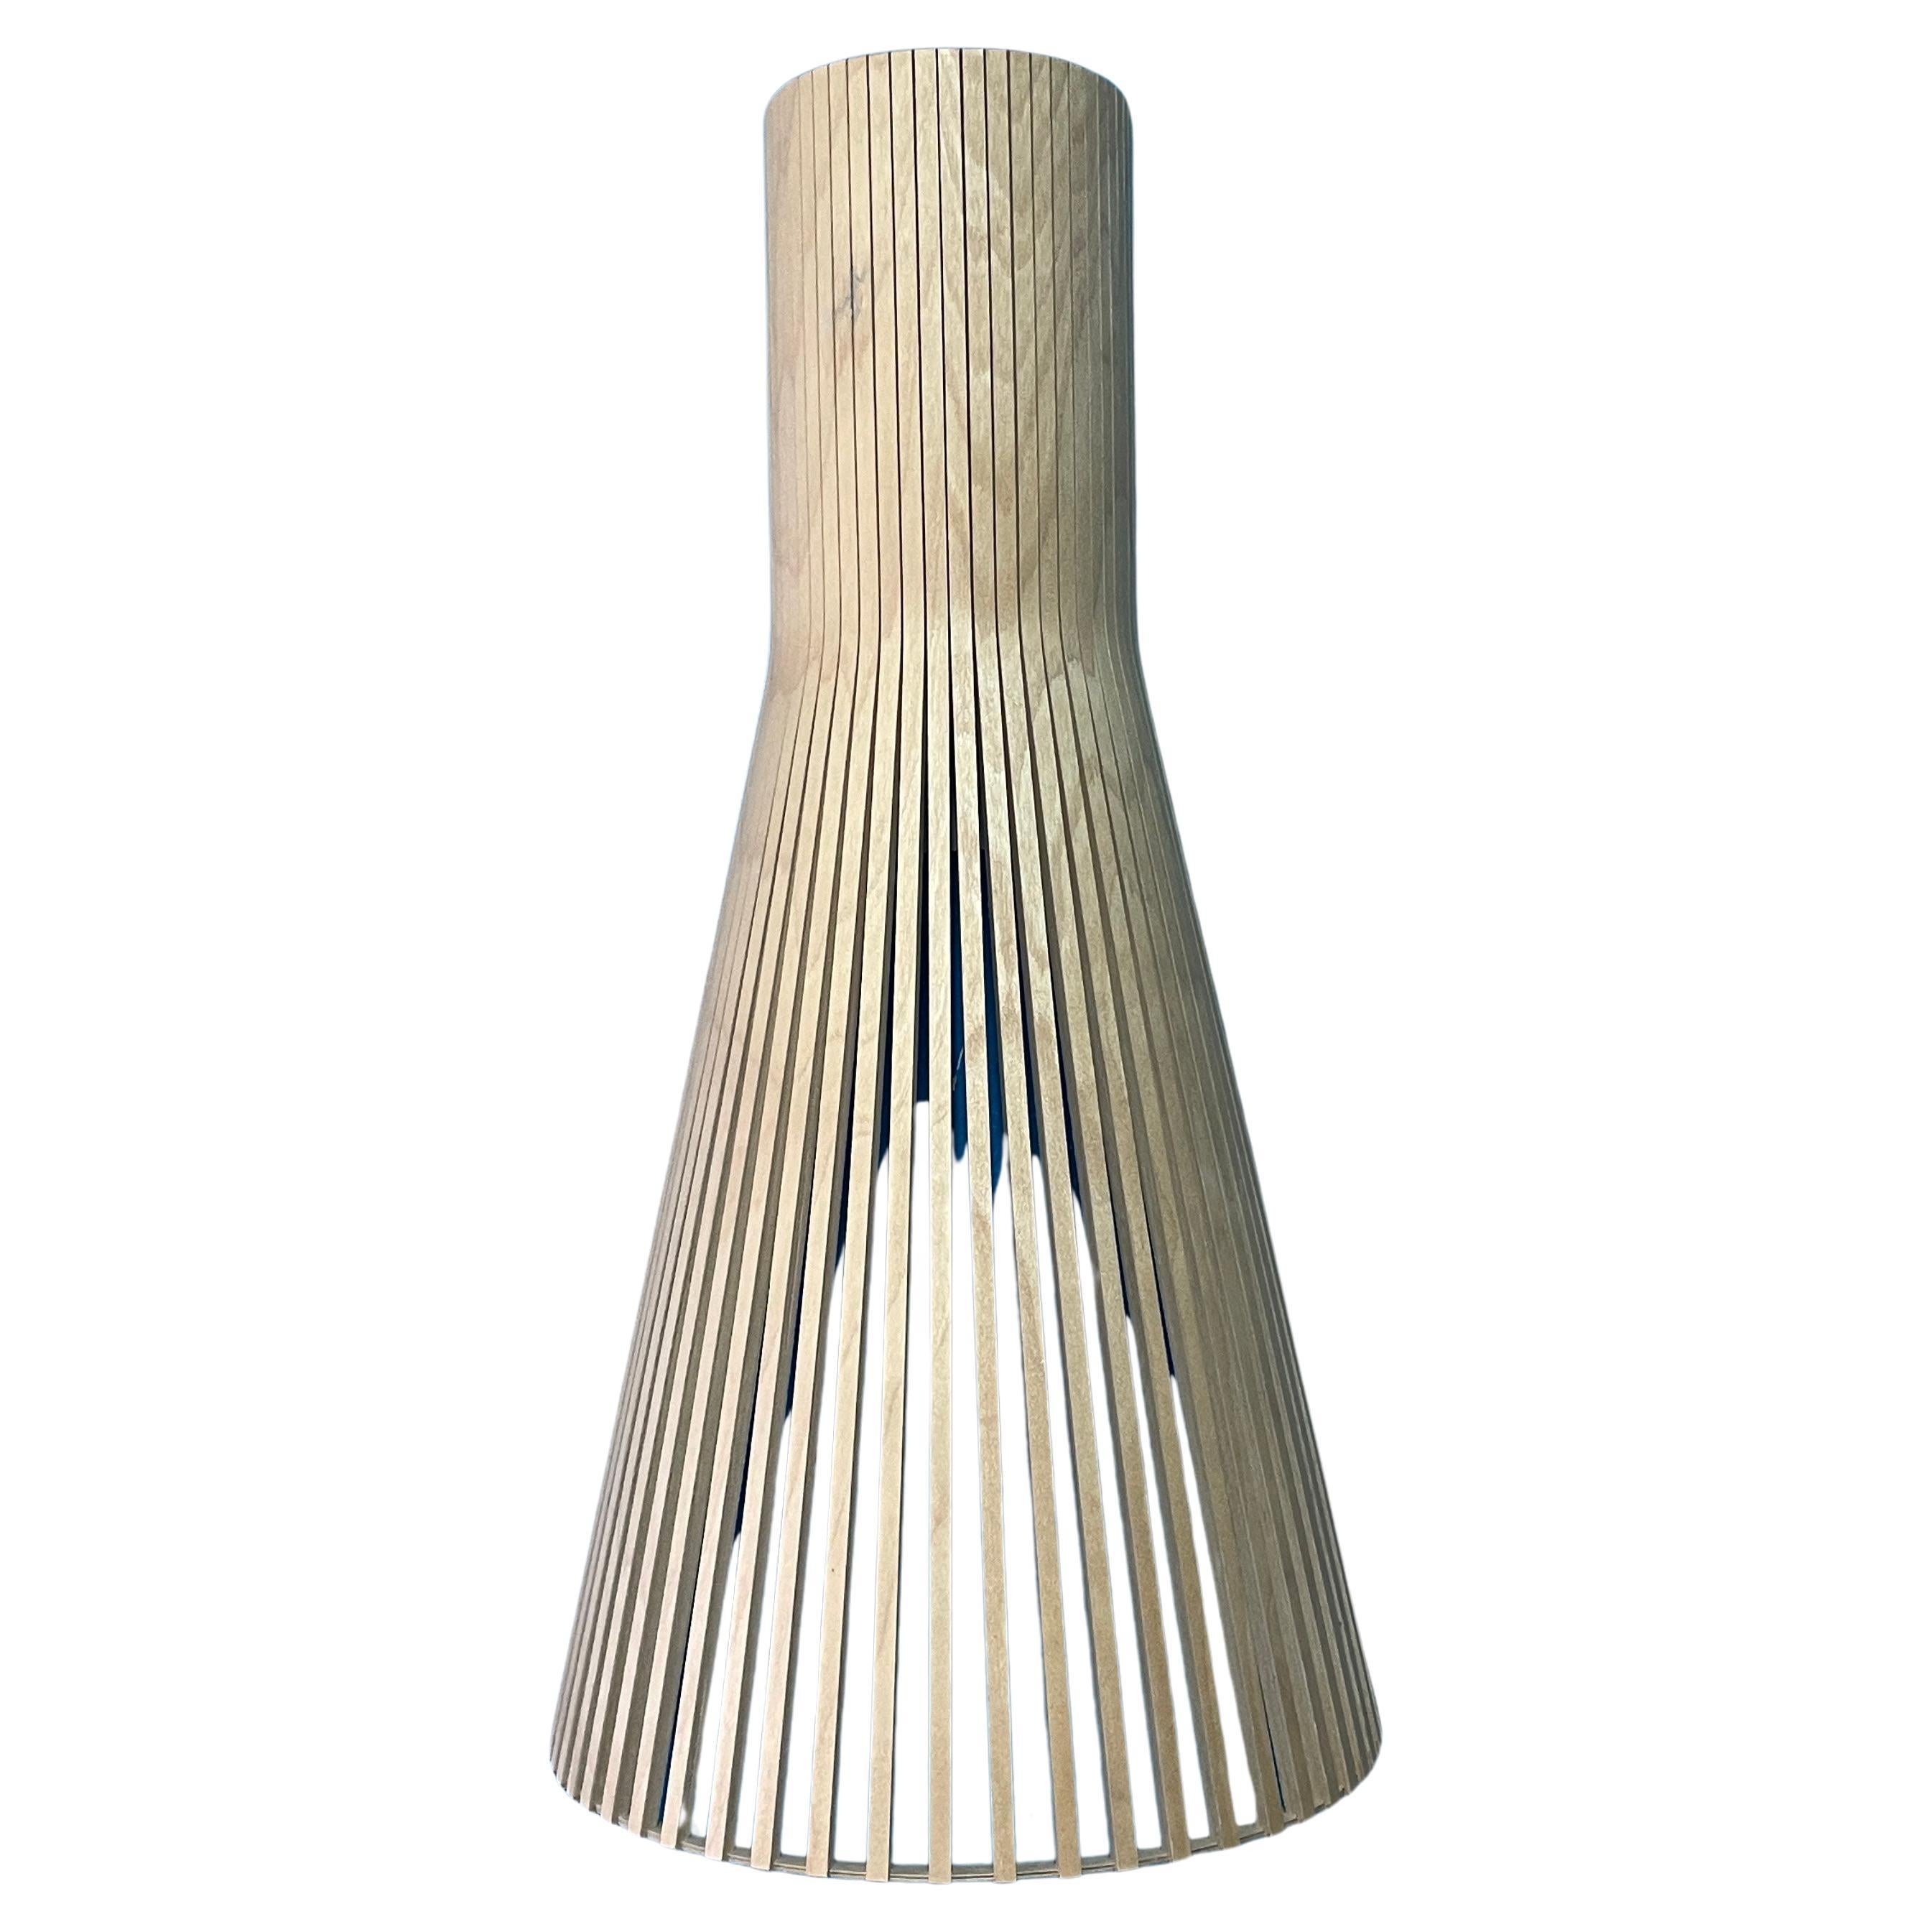 Wooden Secto 4230 Wall Lamp by Secto Design Finland For Sale